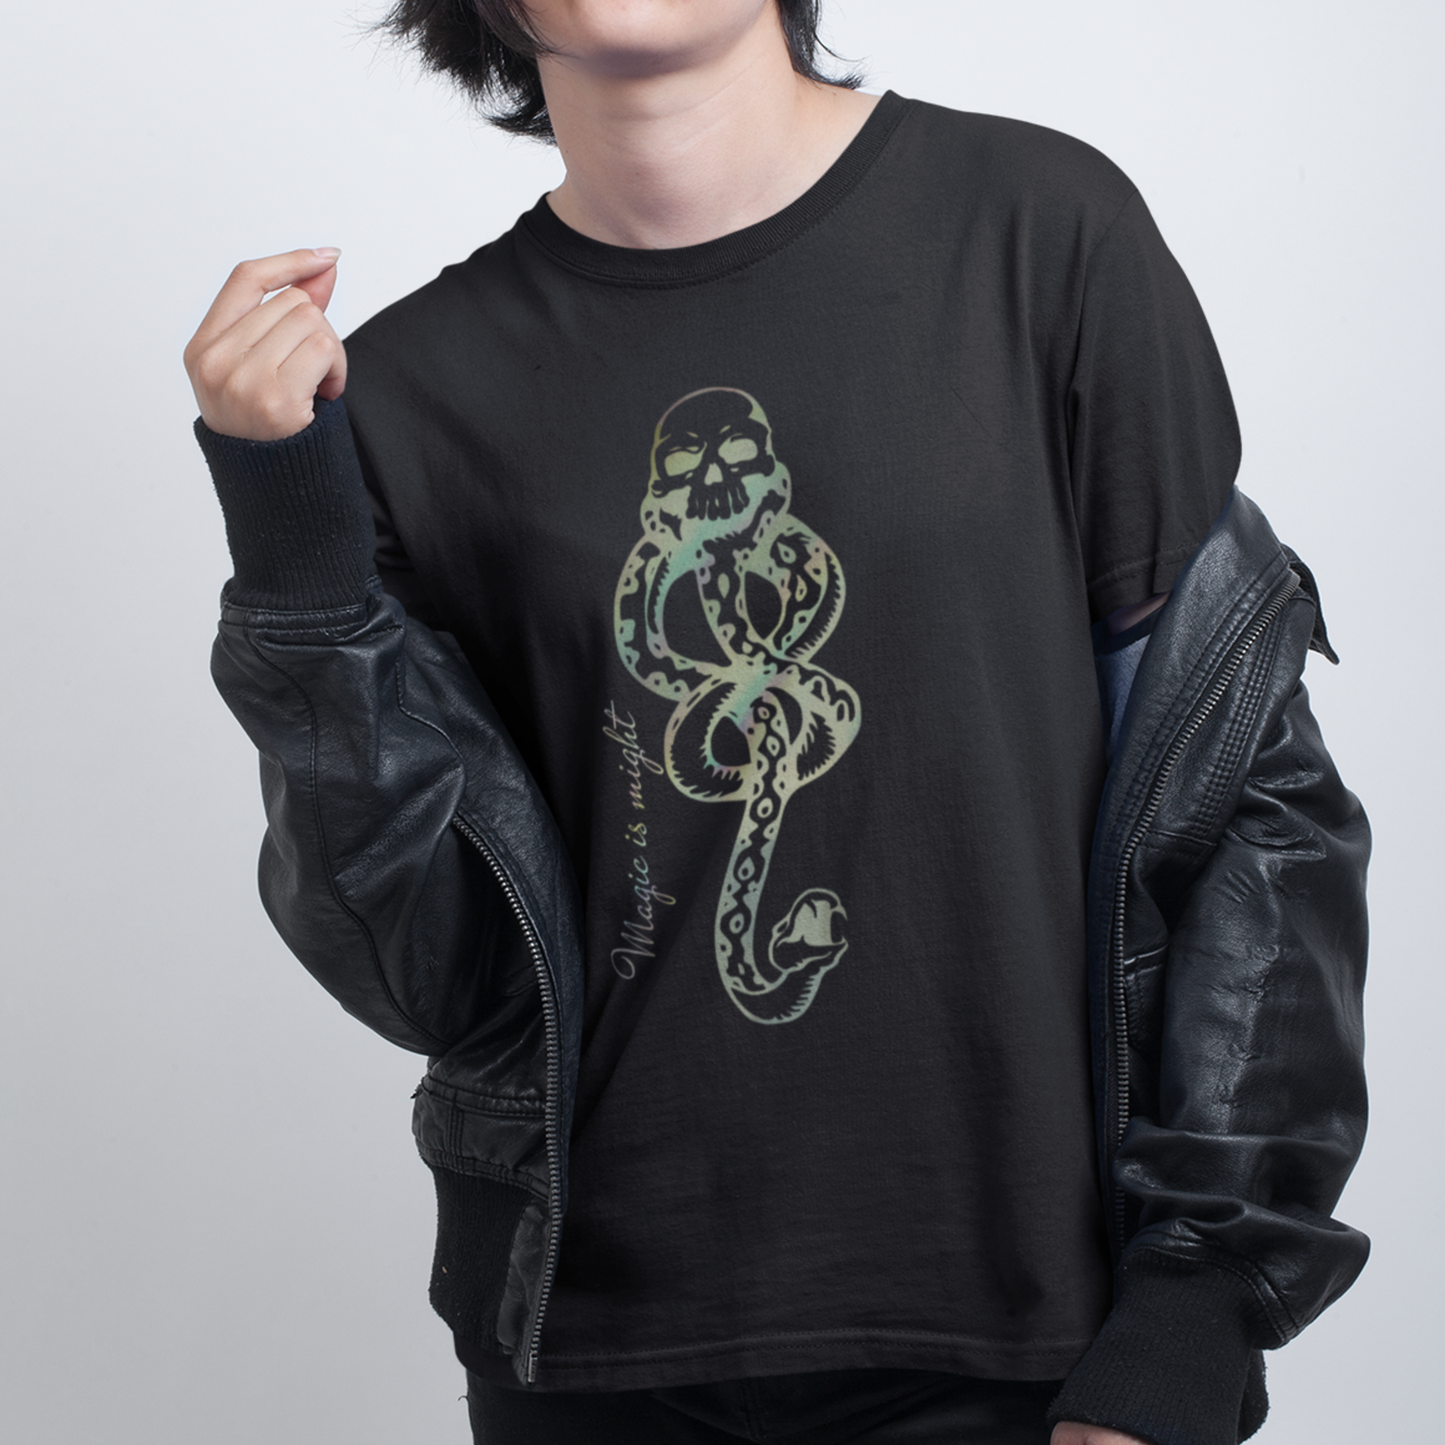 Wizarding World Snake and Skull Bookish T-Shirt - Magic is Might